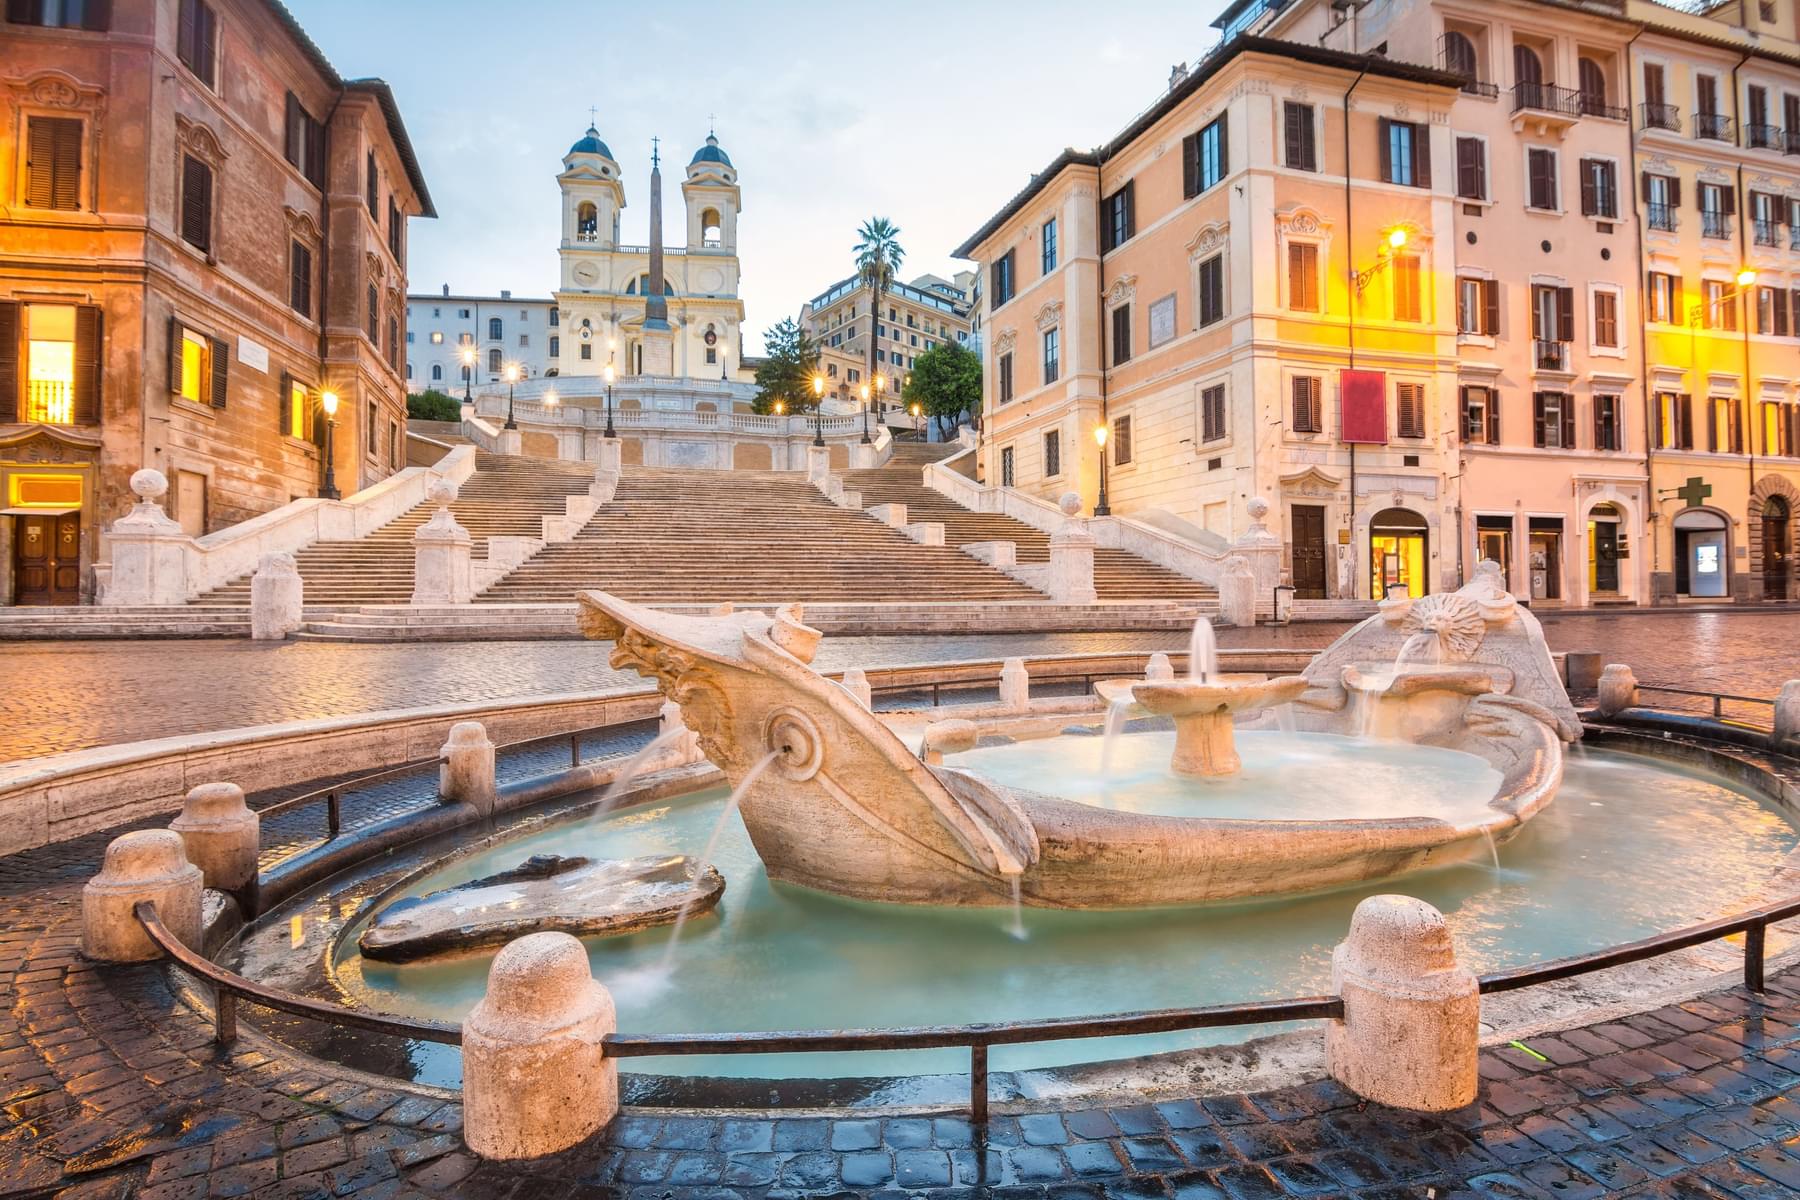 Rome Evening Panoramic Walking Tour Including Trevi Fountain and Spanish Steps